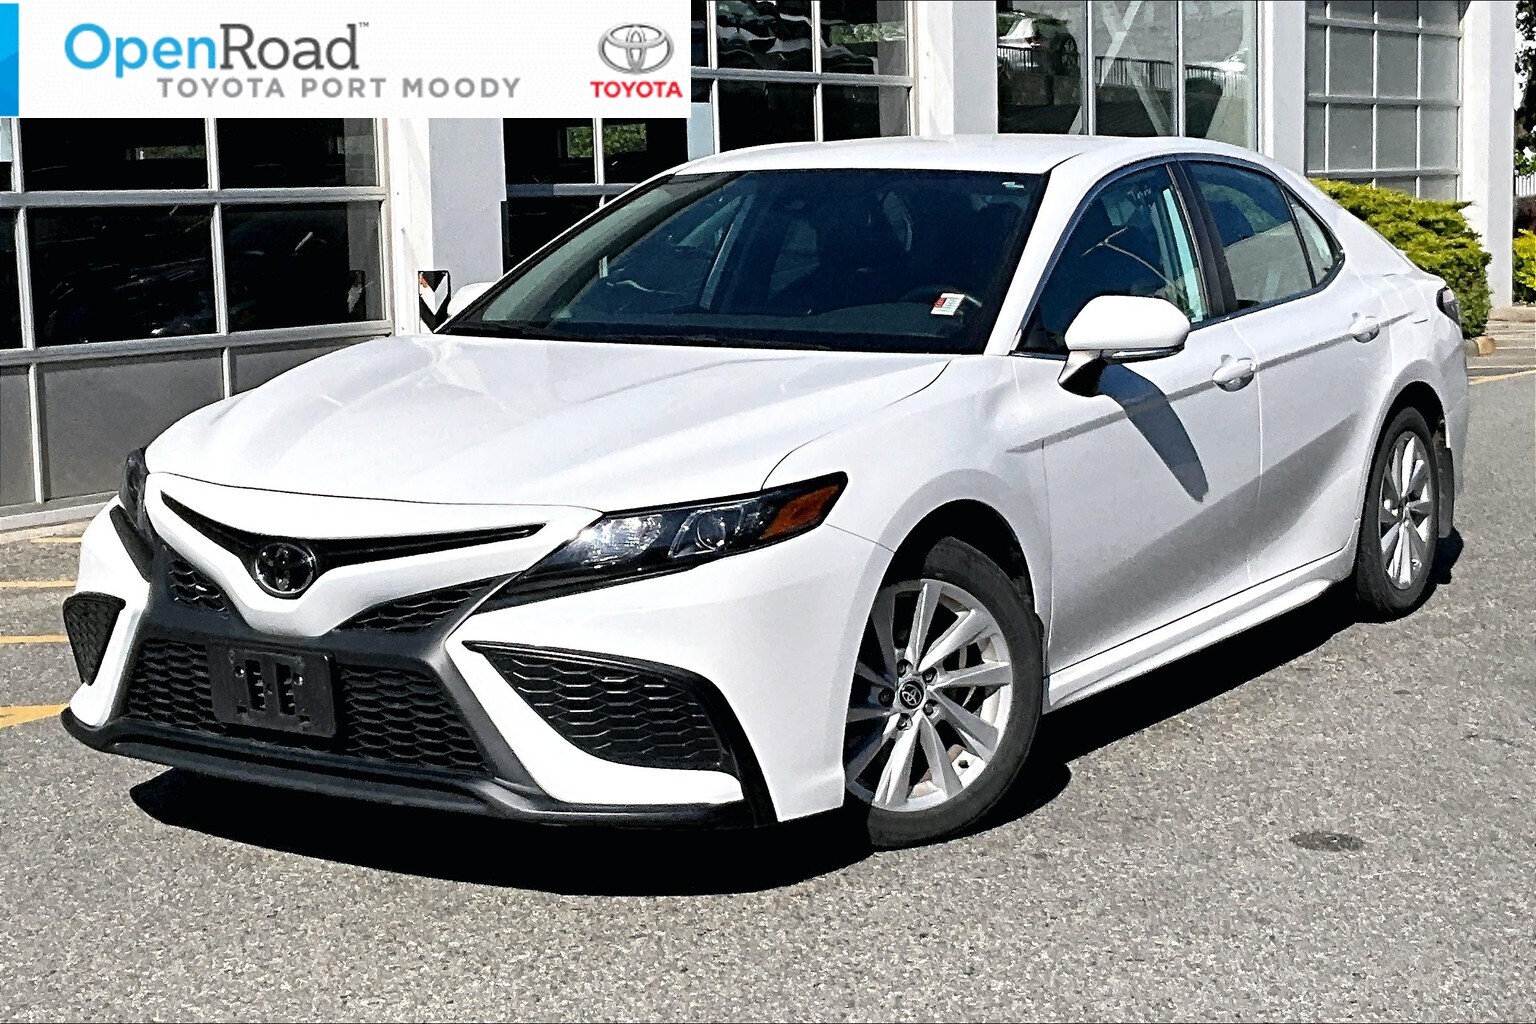 2022 Toyota Camry SE |OpenRoad True Price |Local |One Owner |No Clai